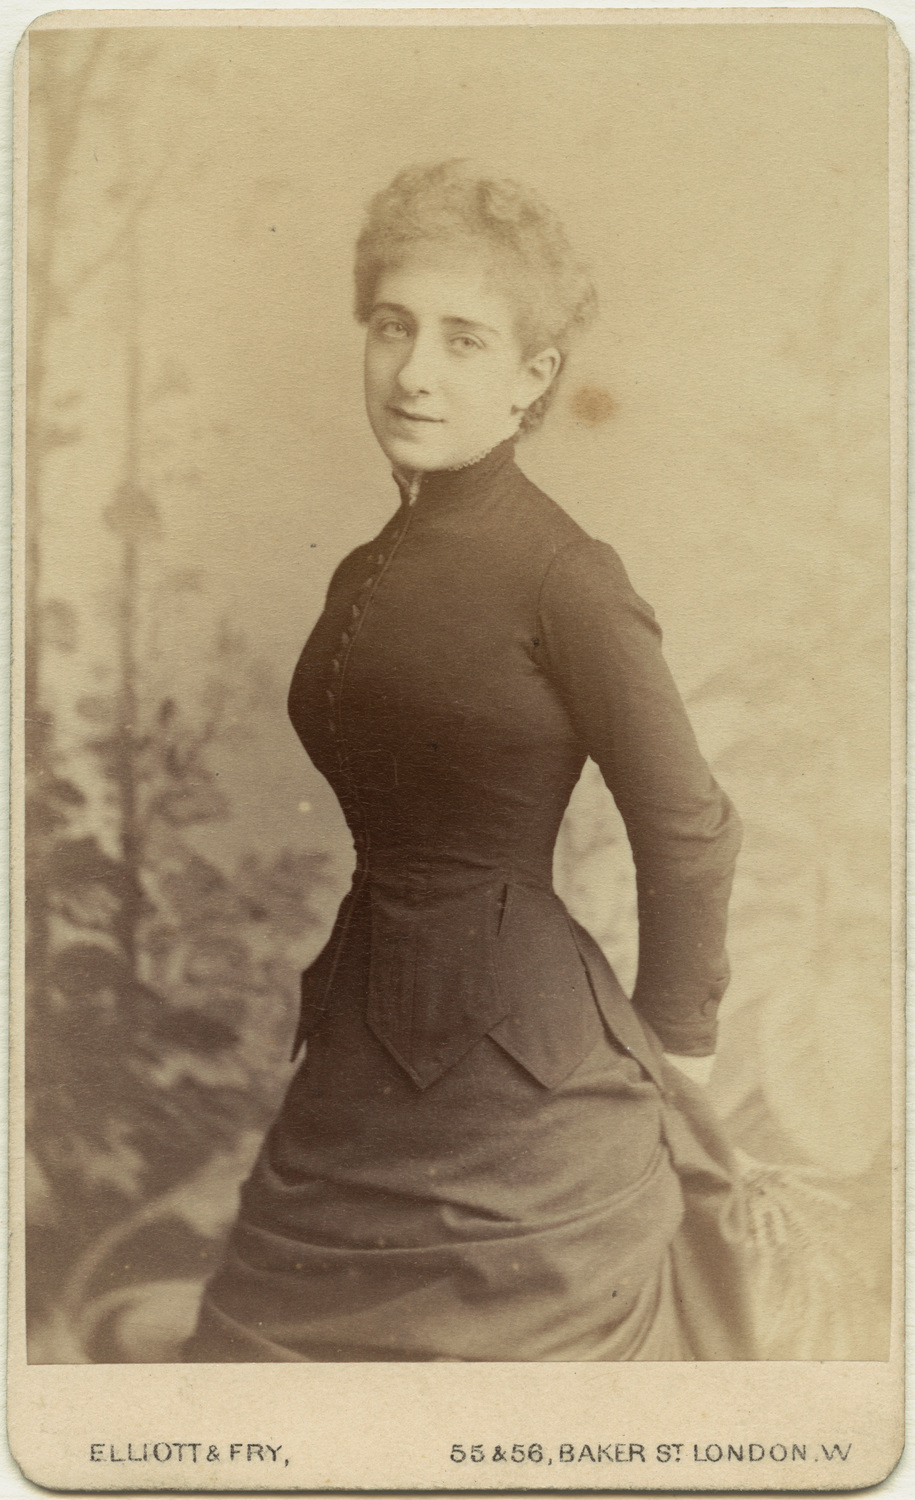 Ada Leverson is shown standing (or possibly leaning) with hands clasped behind her in a front facing pose, angled slightly to the right. Though her body is angled, she is gazing straightforward. Her eyes appear to be lightly coloured, and she is smiling softly. Her hair is very short, curly, and falls slightly onto her forehead. Leverson is wearing a dark button-up dress. The dress has a collar that extends the length of her neck, decorative pointed fabric that hangs off her waist section, and a skirt that extends outward at her waist and bunches up behind her. In the background, behind Leverson, there appears to be a garden with upward growing vines. The image is shaded in brown sepia tones, and has a beige rounded-rectangular border. The text “ELLIOTT & FRY 55&56, BAKER ST LONDON, W” is written in capitalized letters within the bottom border of the photograph.